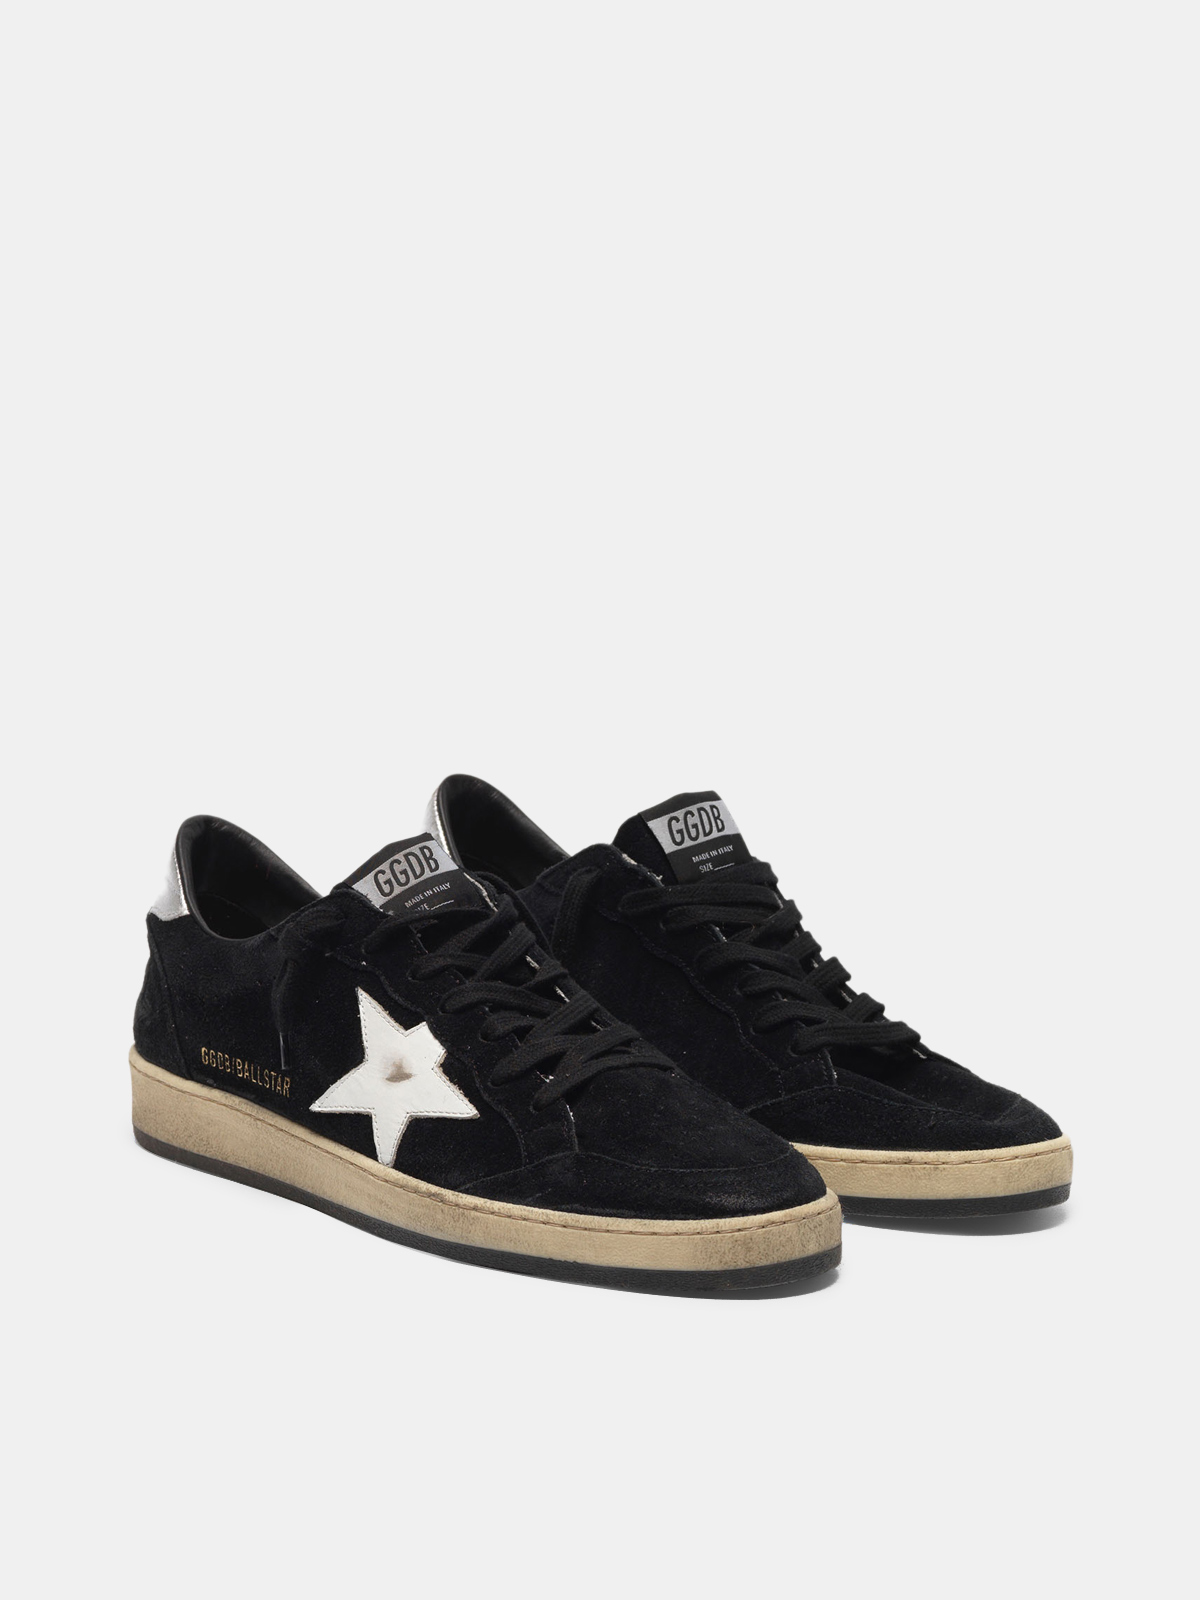 Ball Star sneakers in suede with contrasting star and metal heel tab ...